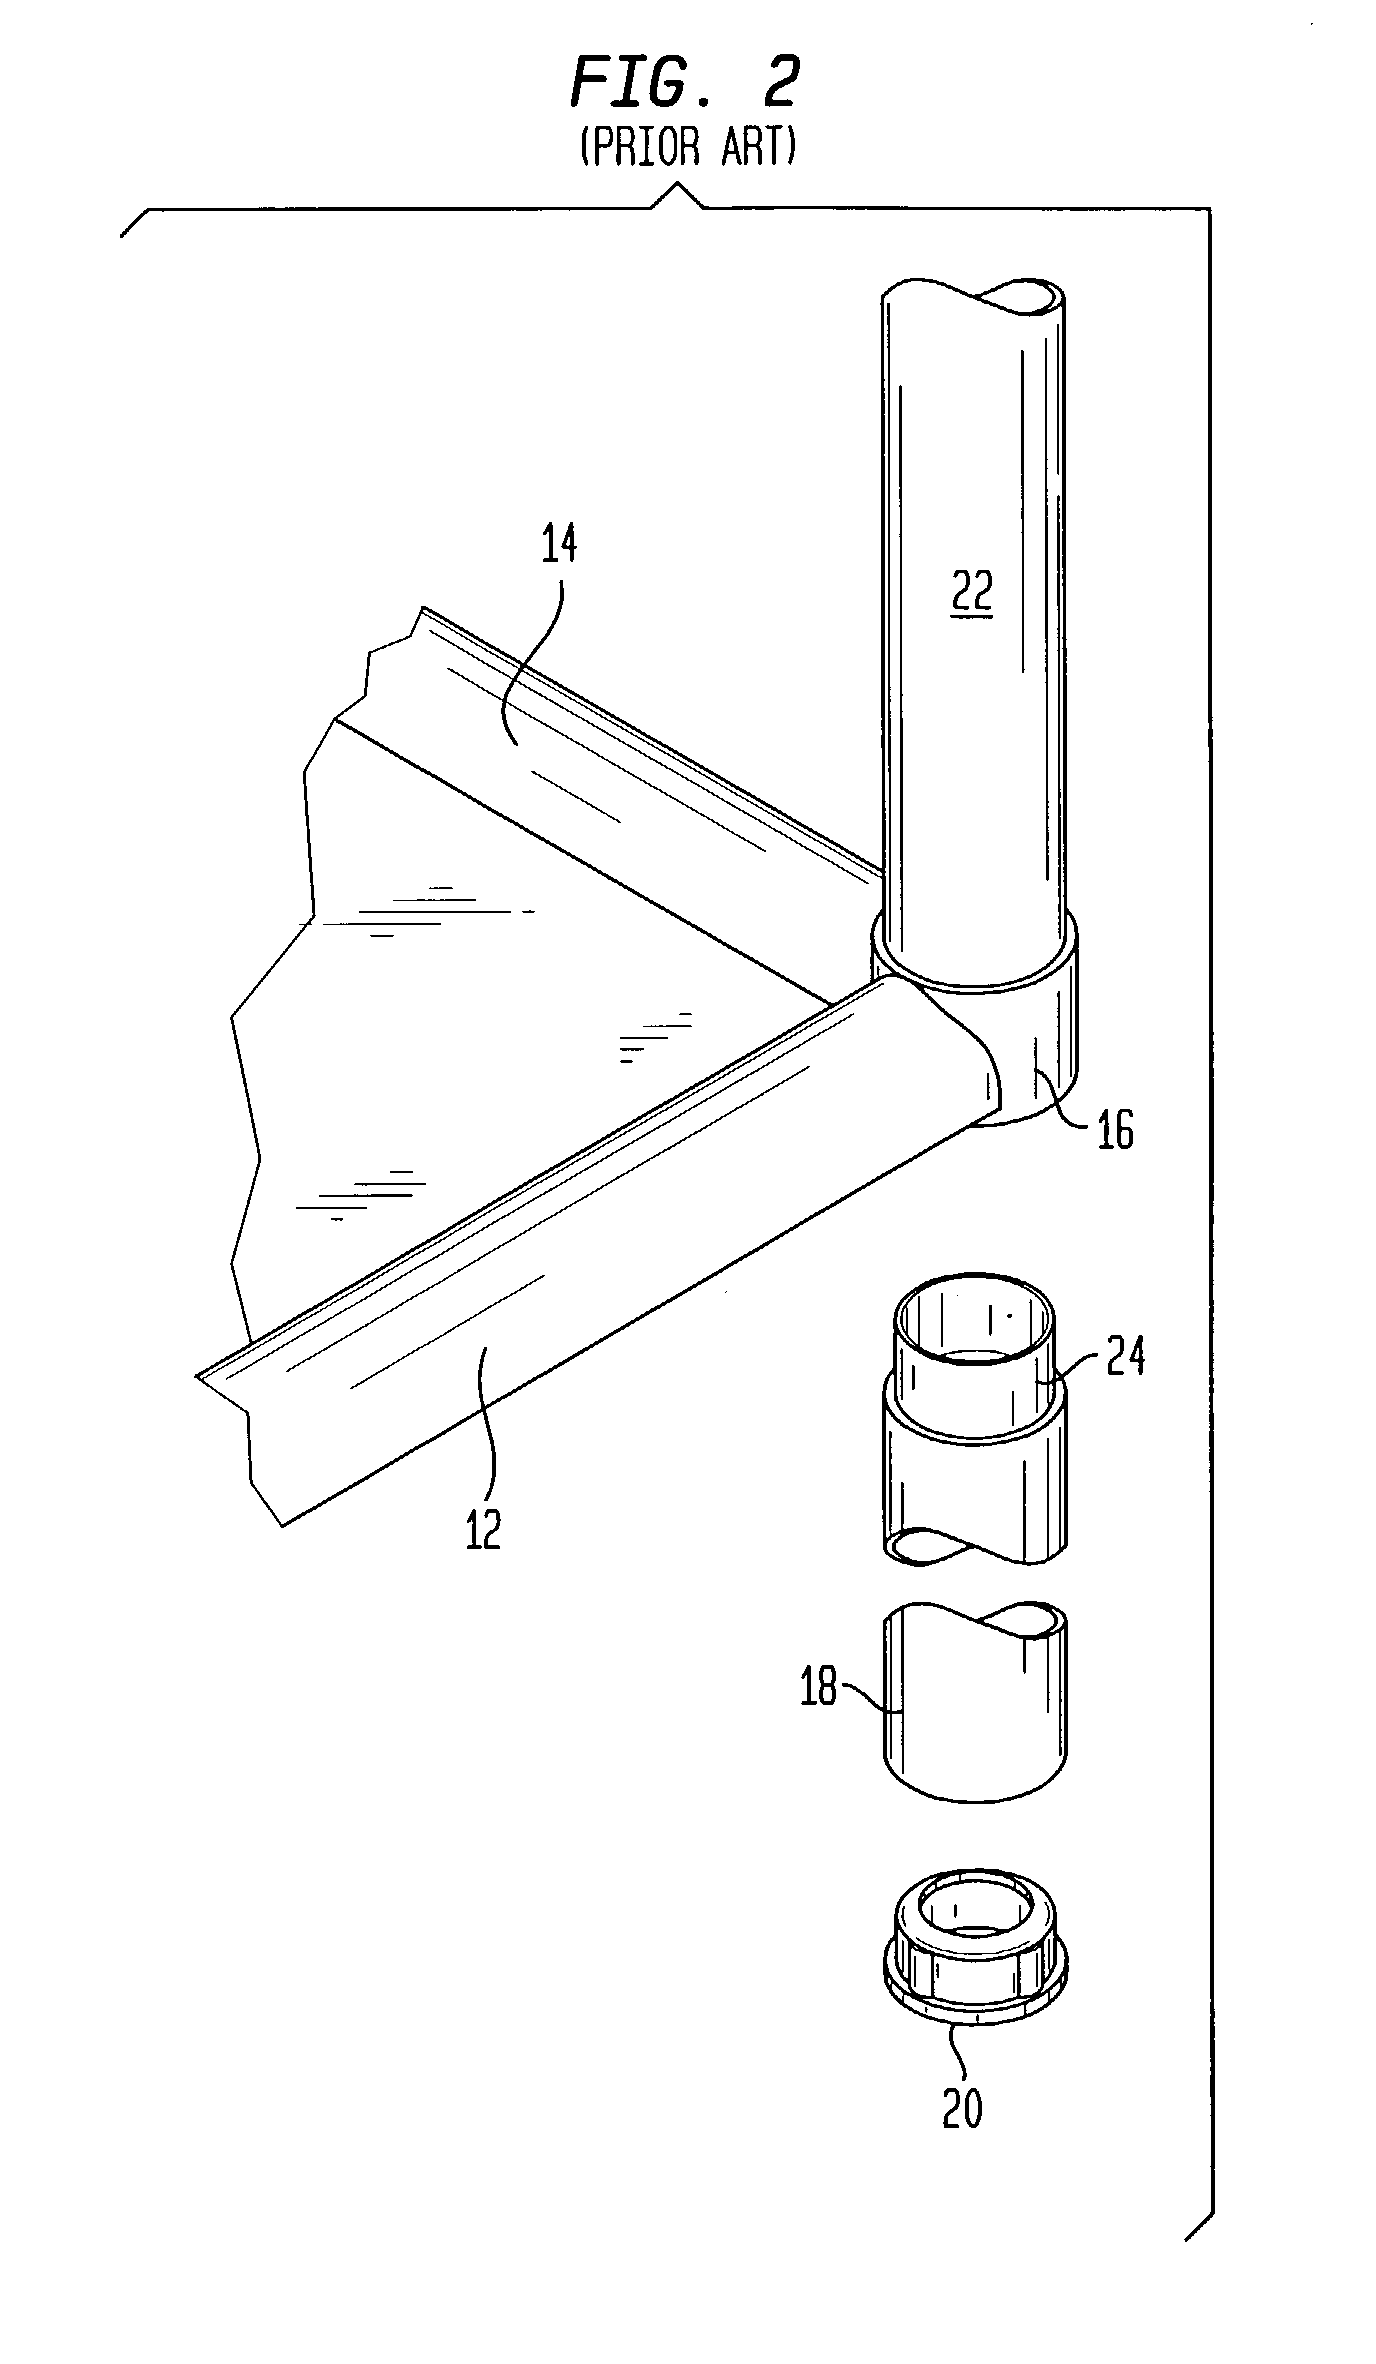 Corner joint and shelf module for use in light-duty all-plastic shelf units